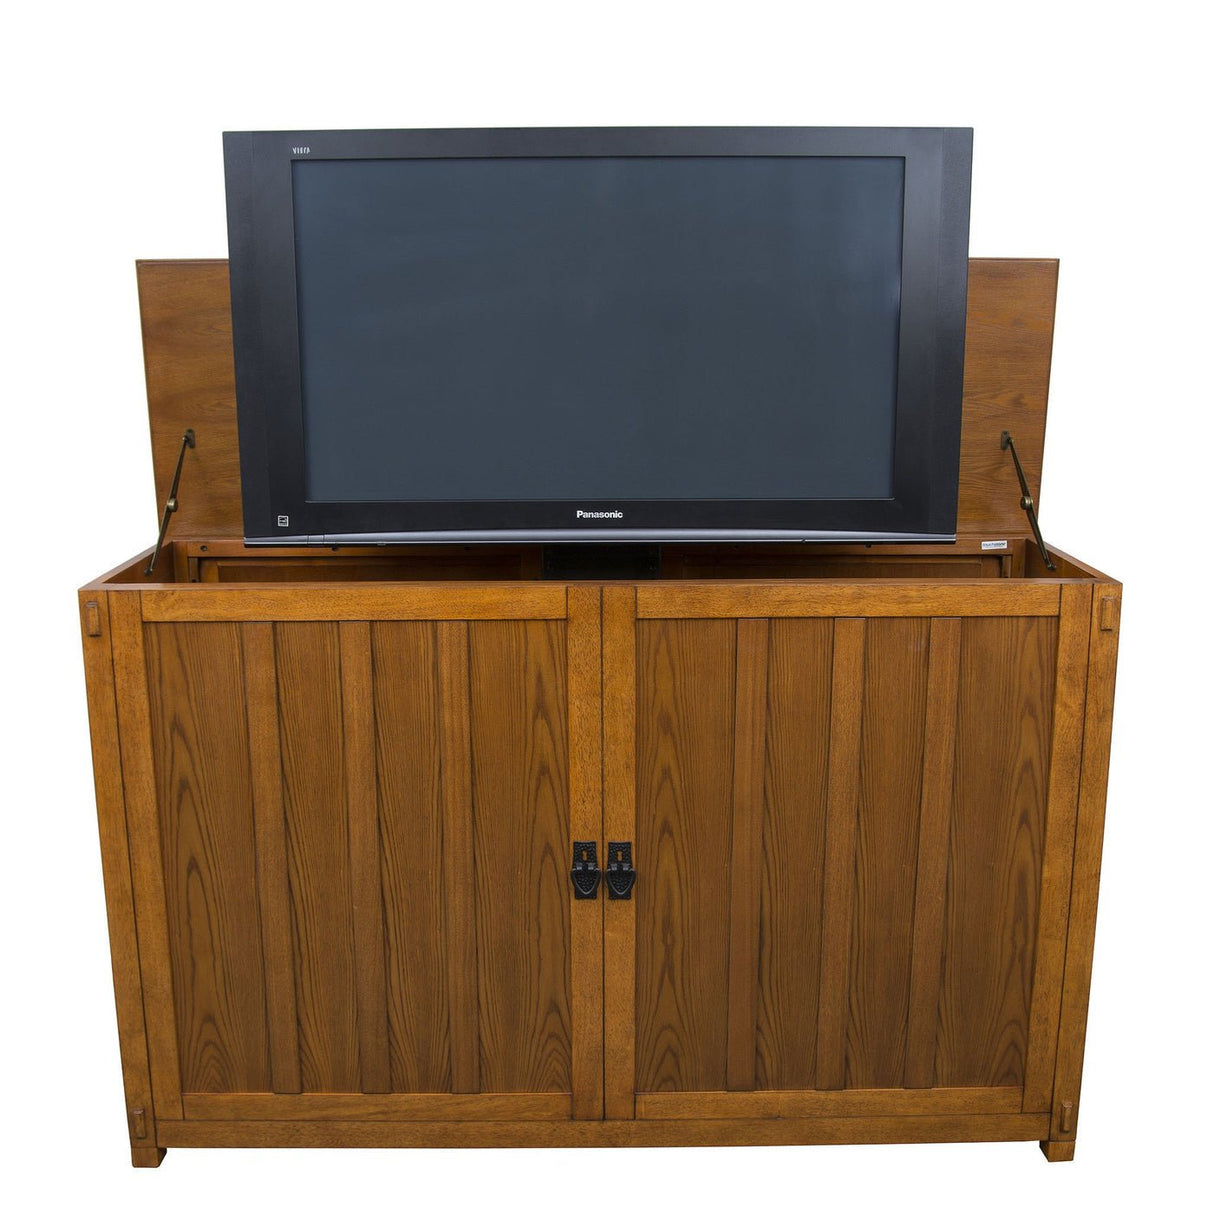 Touchstone Grand Elevate 74006 Mission TV Lift Cabinet for 65" Flat screen TVs - TS-74006 - Avanquil